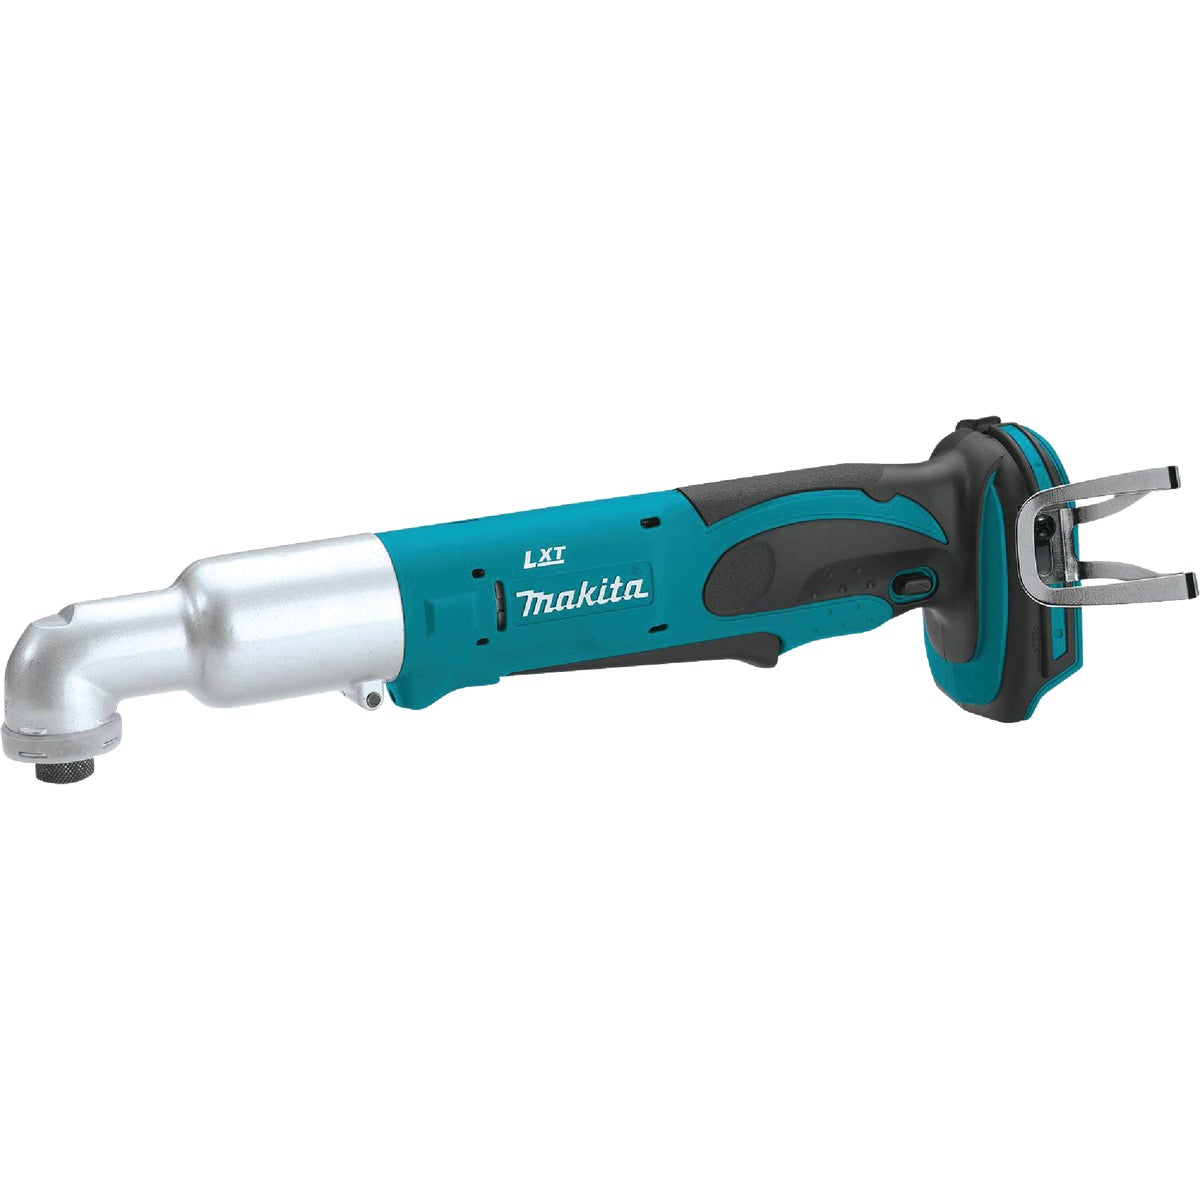 Makita 18-Volt LXT Lithium-Ion 1/4 In. Hex Cordless Angle Impact Drive (Tool Only)